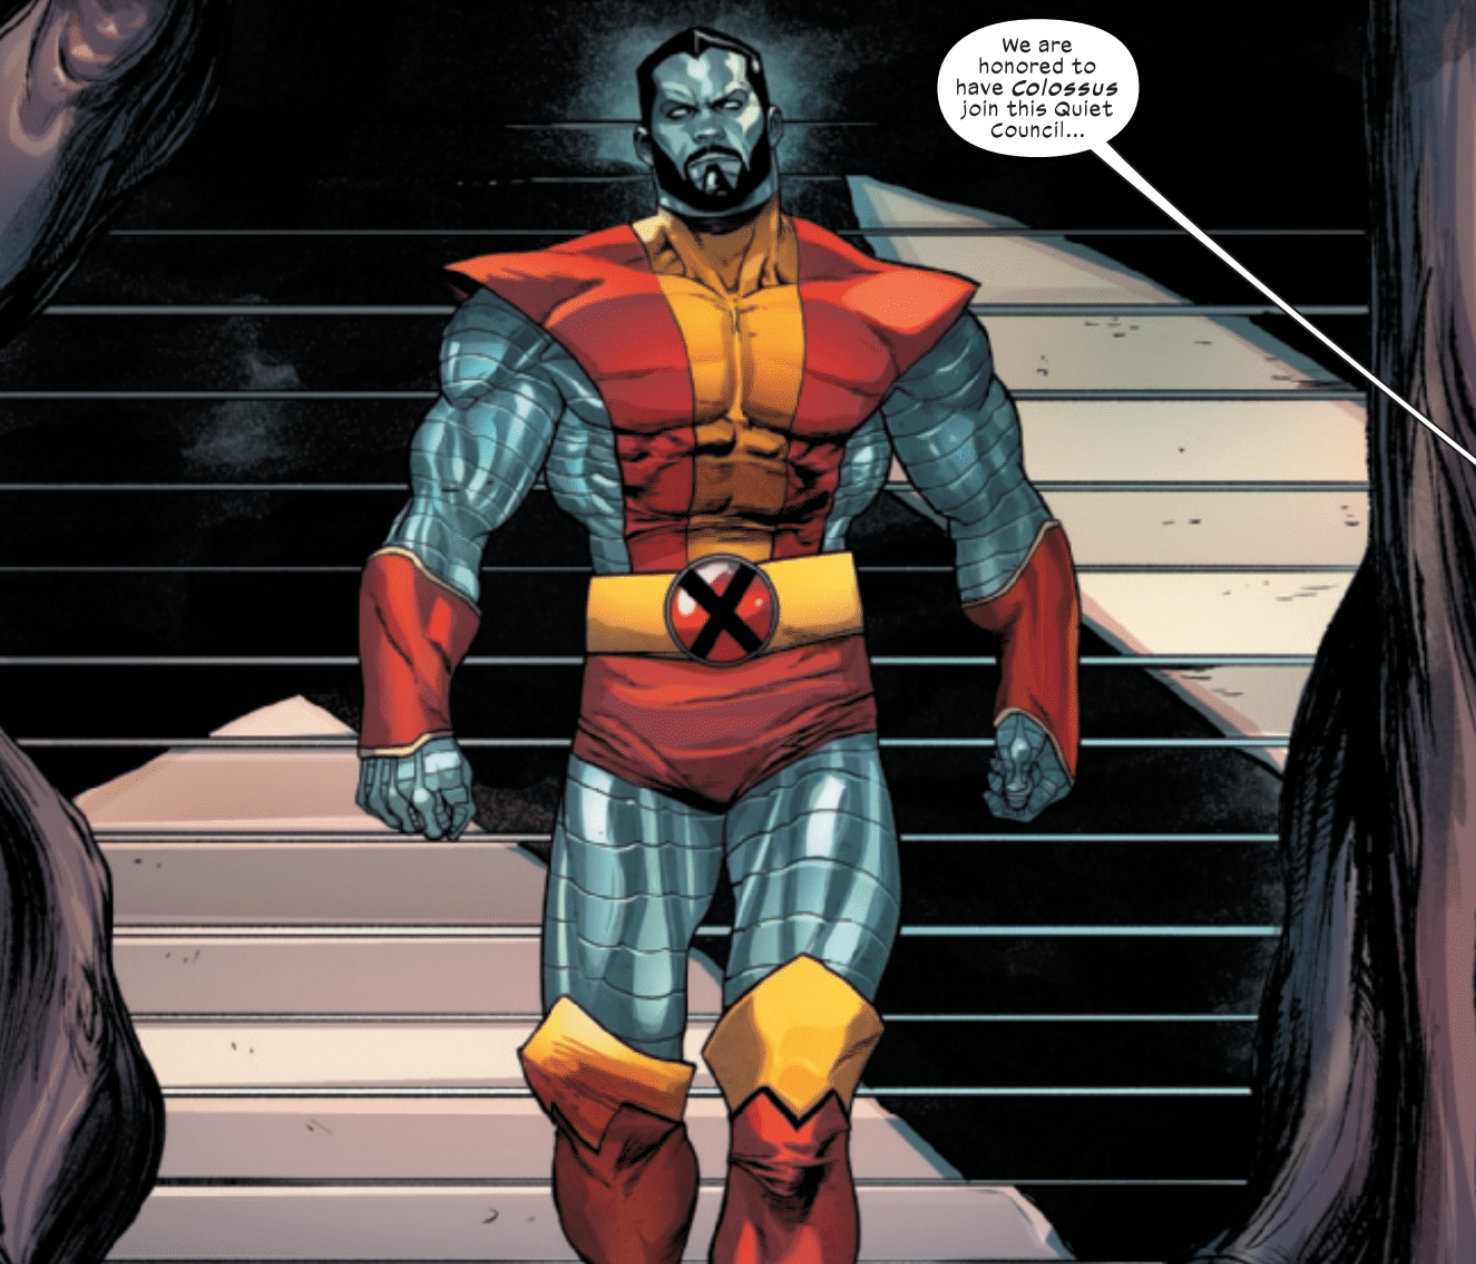 x-men-inferno-colossus-quiet-council.png